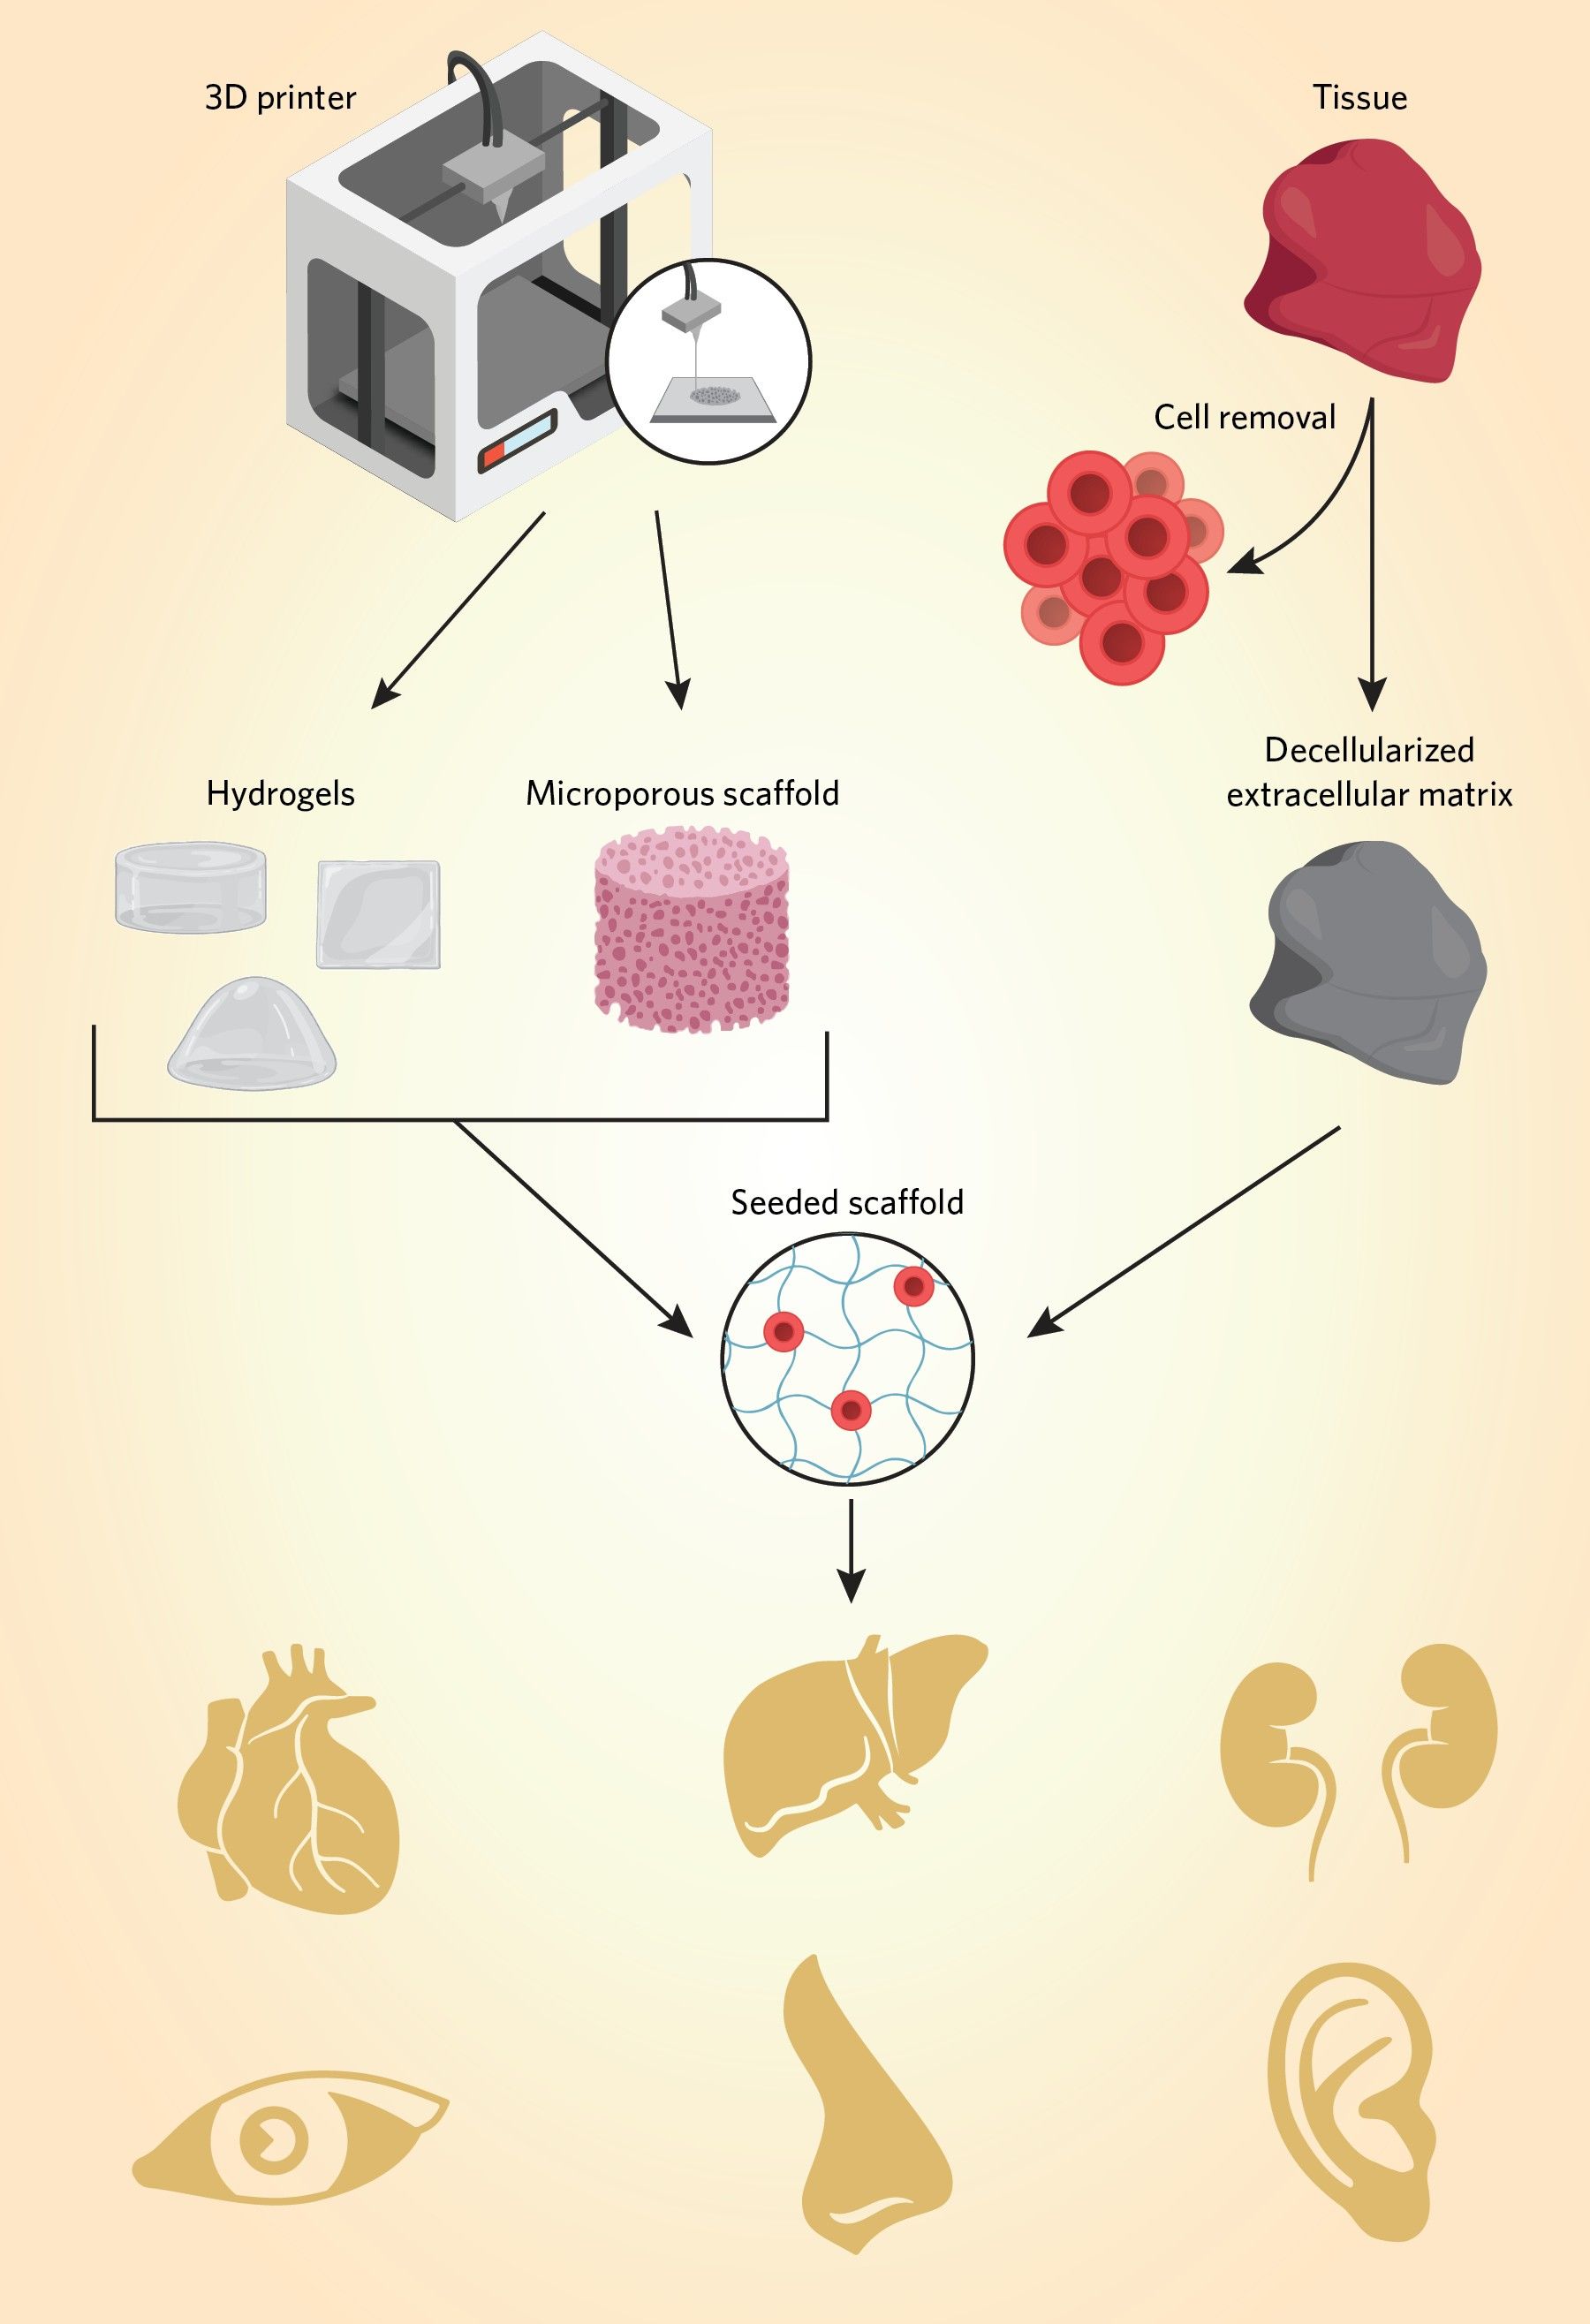 Flow chart illustrating how 3D printing and decellularized tissues are used to make scaffolds for artificial organs.